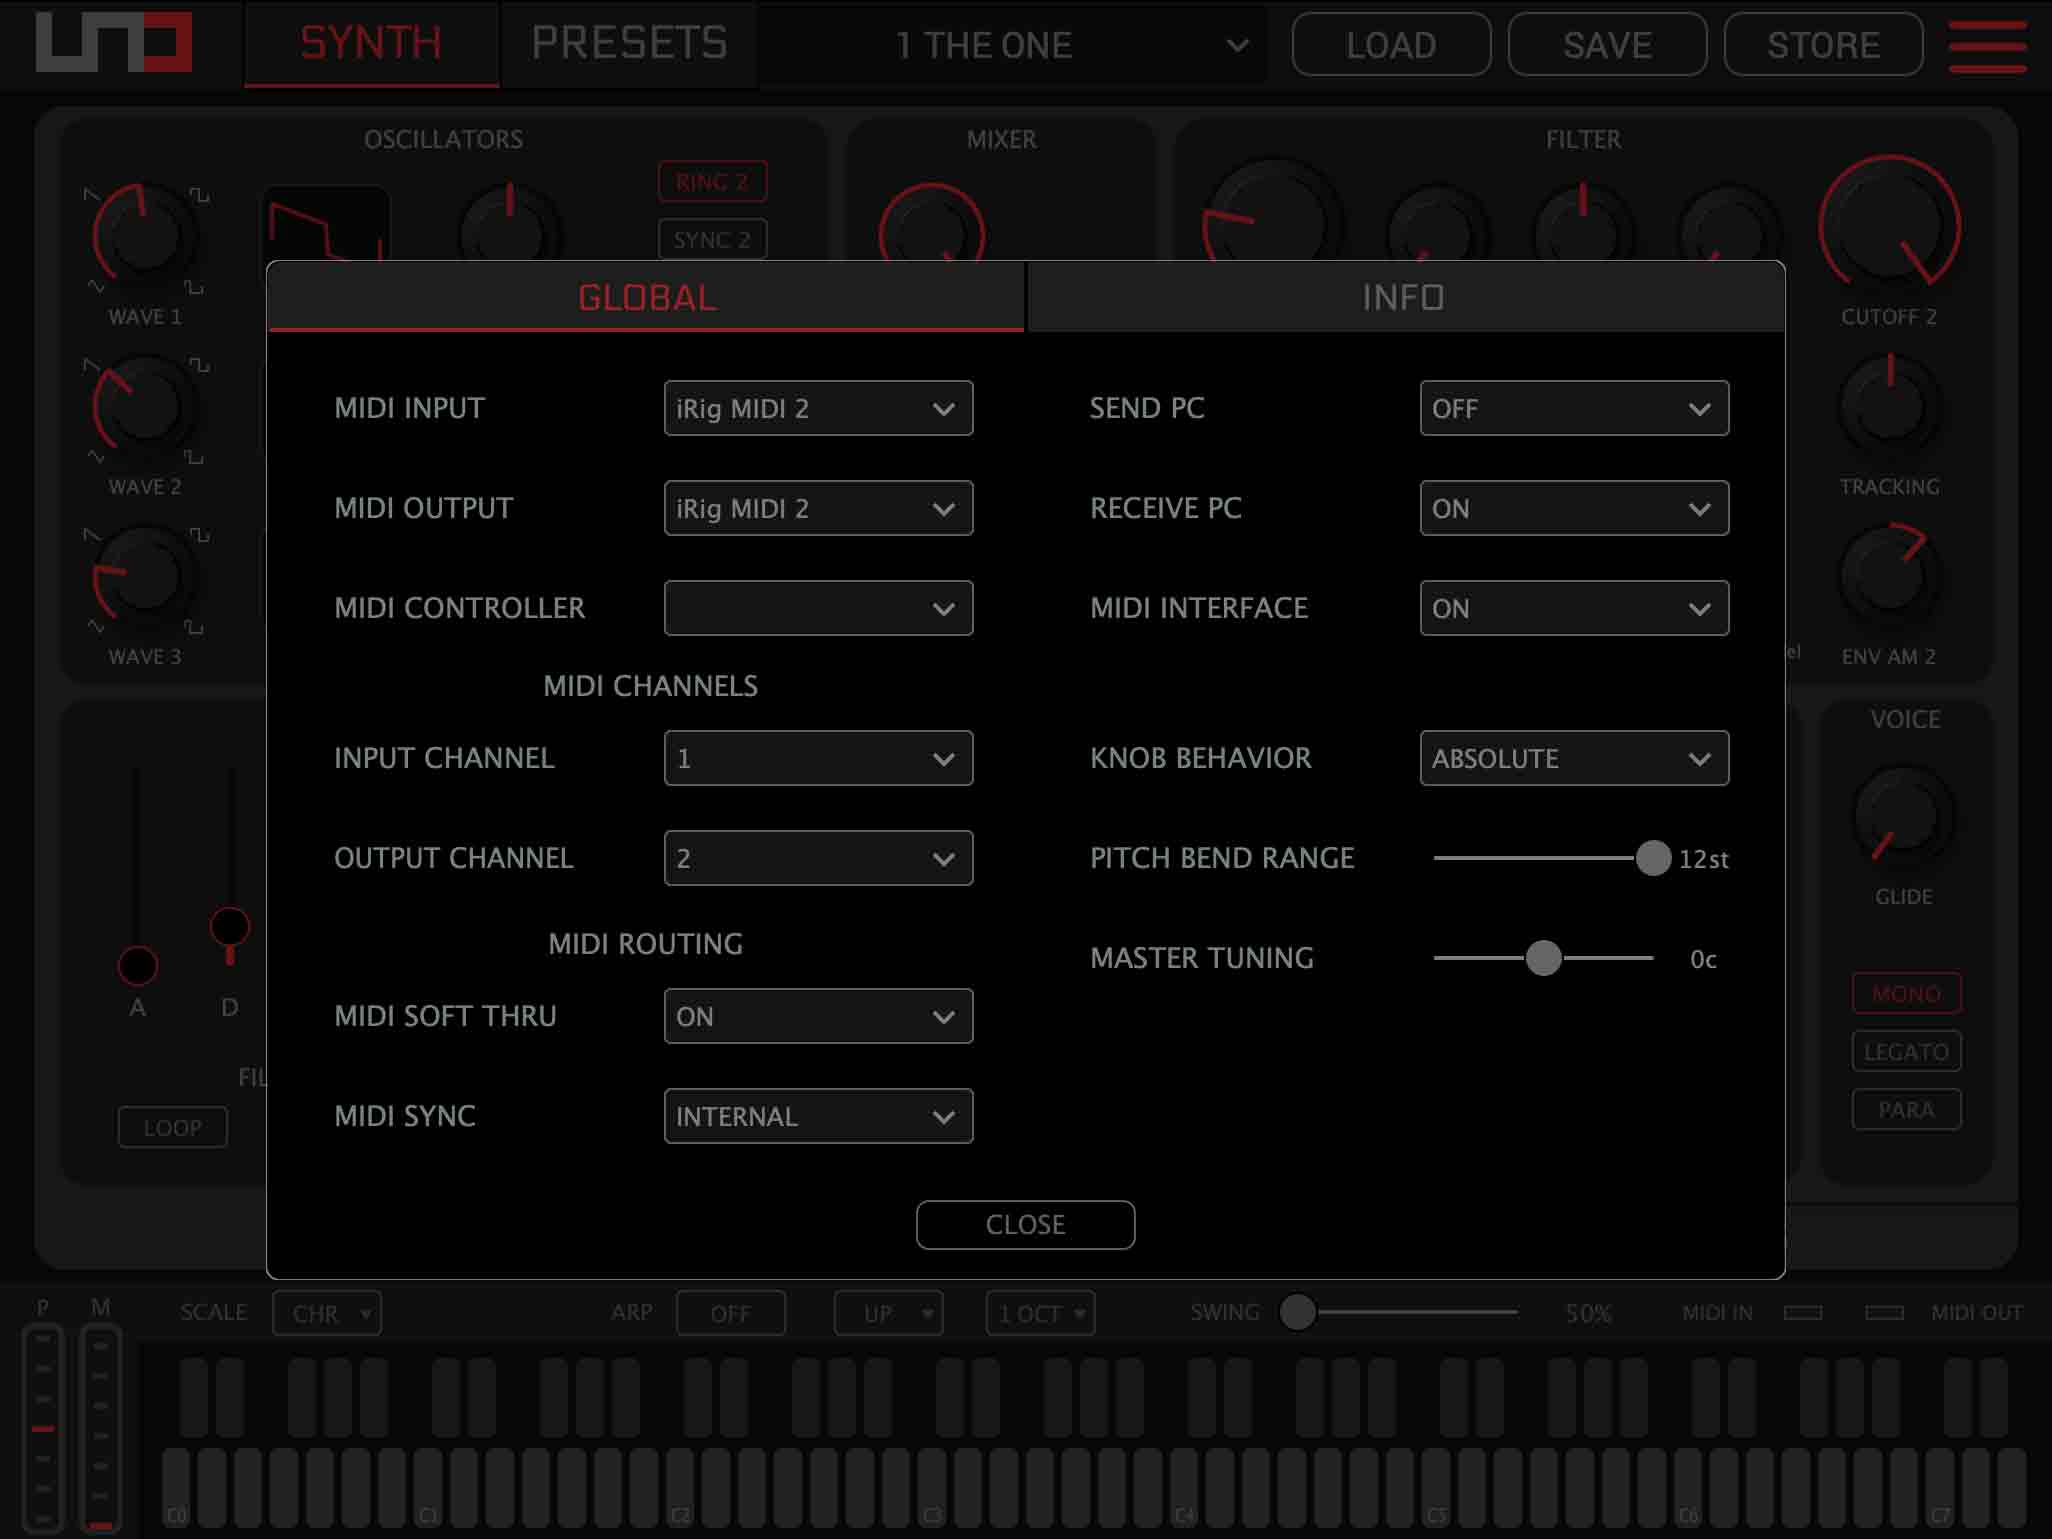 IK Multimedia releases the UNO Synth Pro Editor for Mac/PC